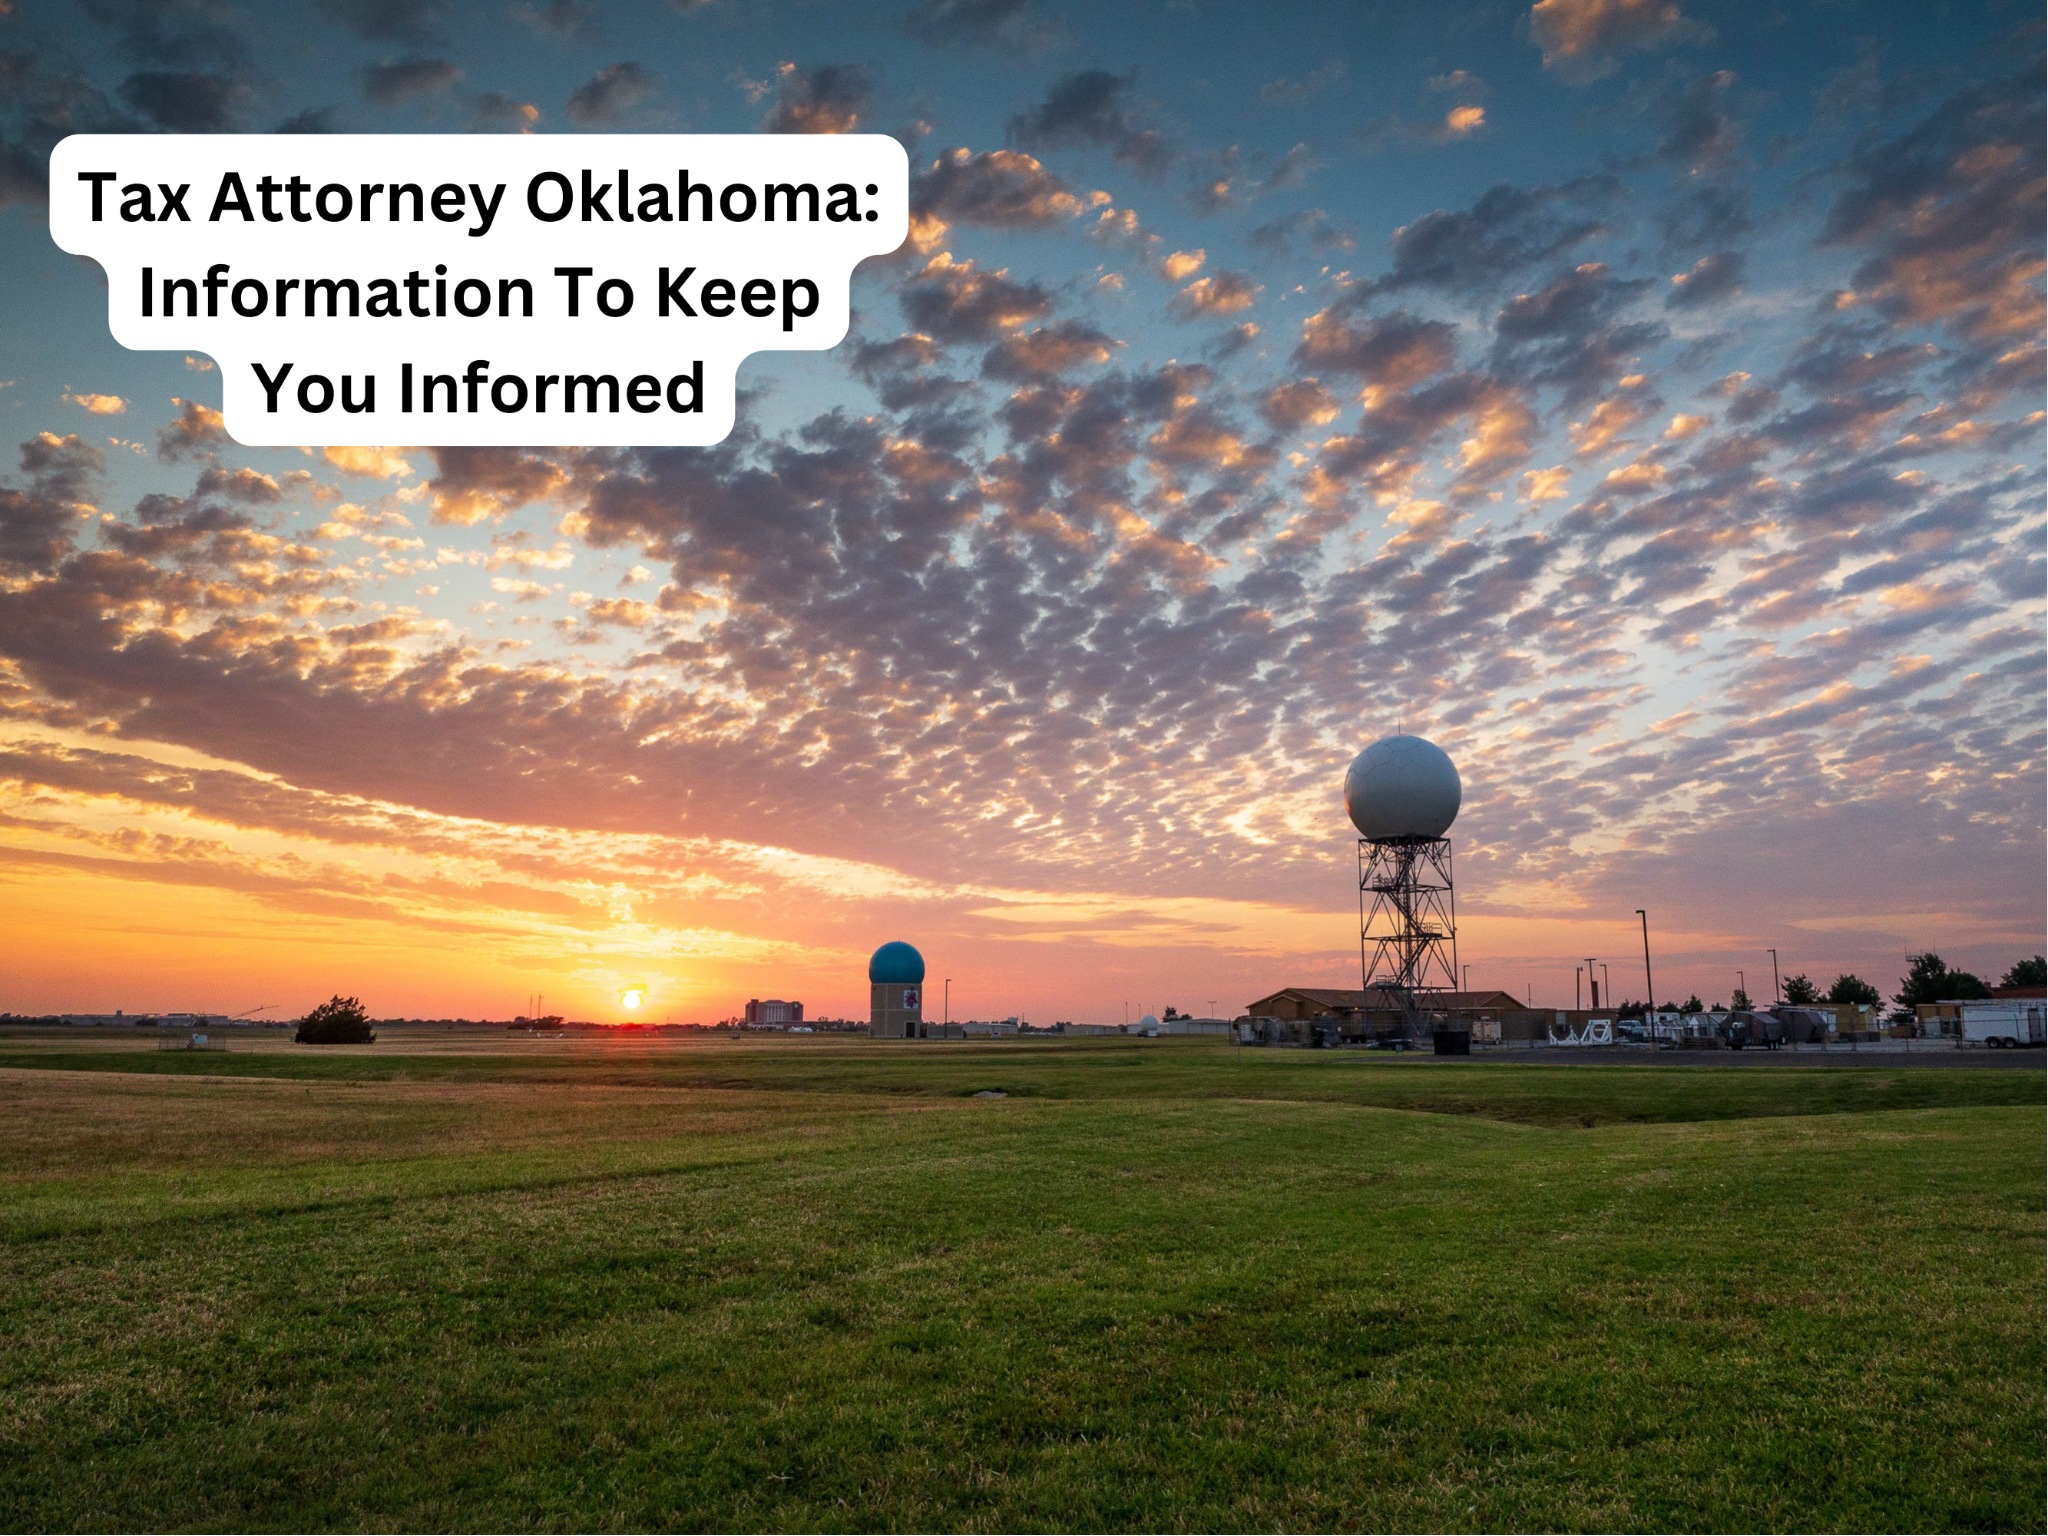 Tax Attorney Oklahoma: Information To Keep You Informed